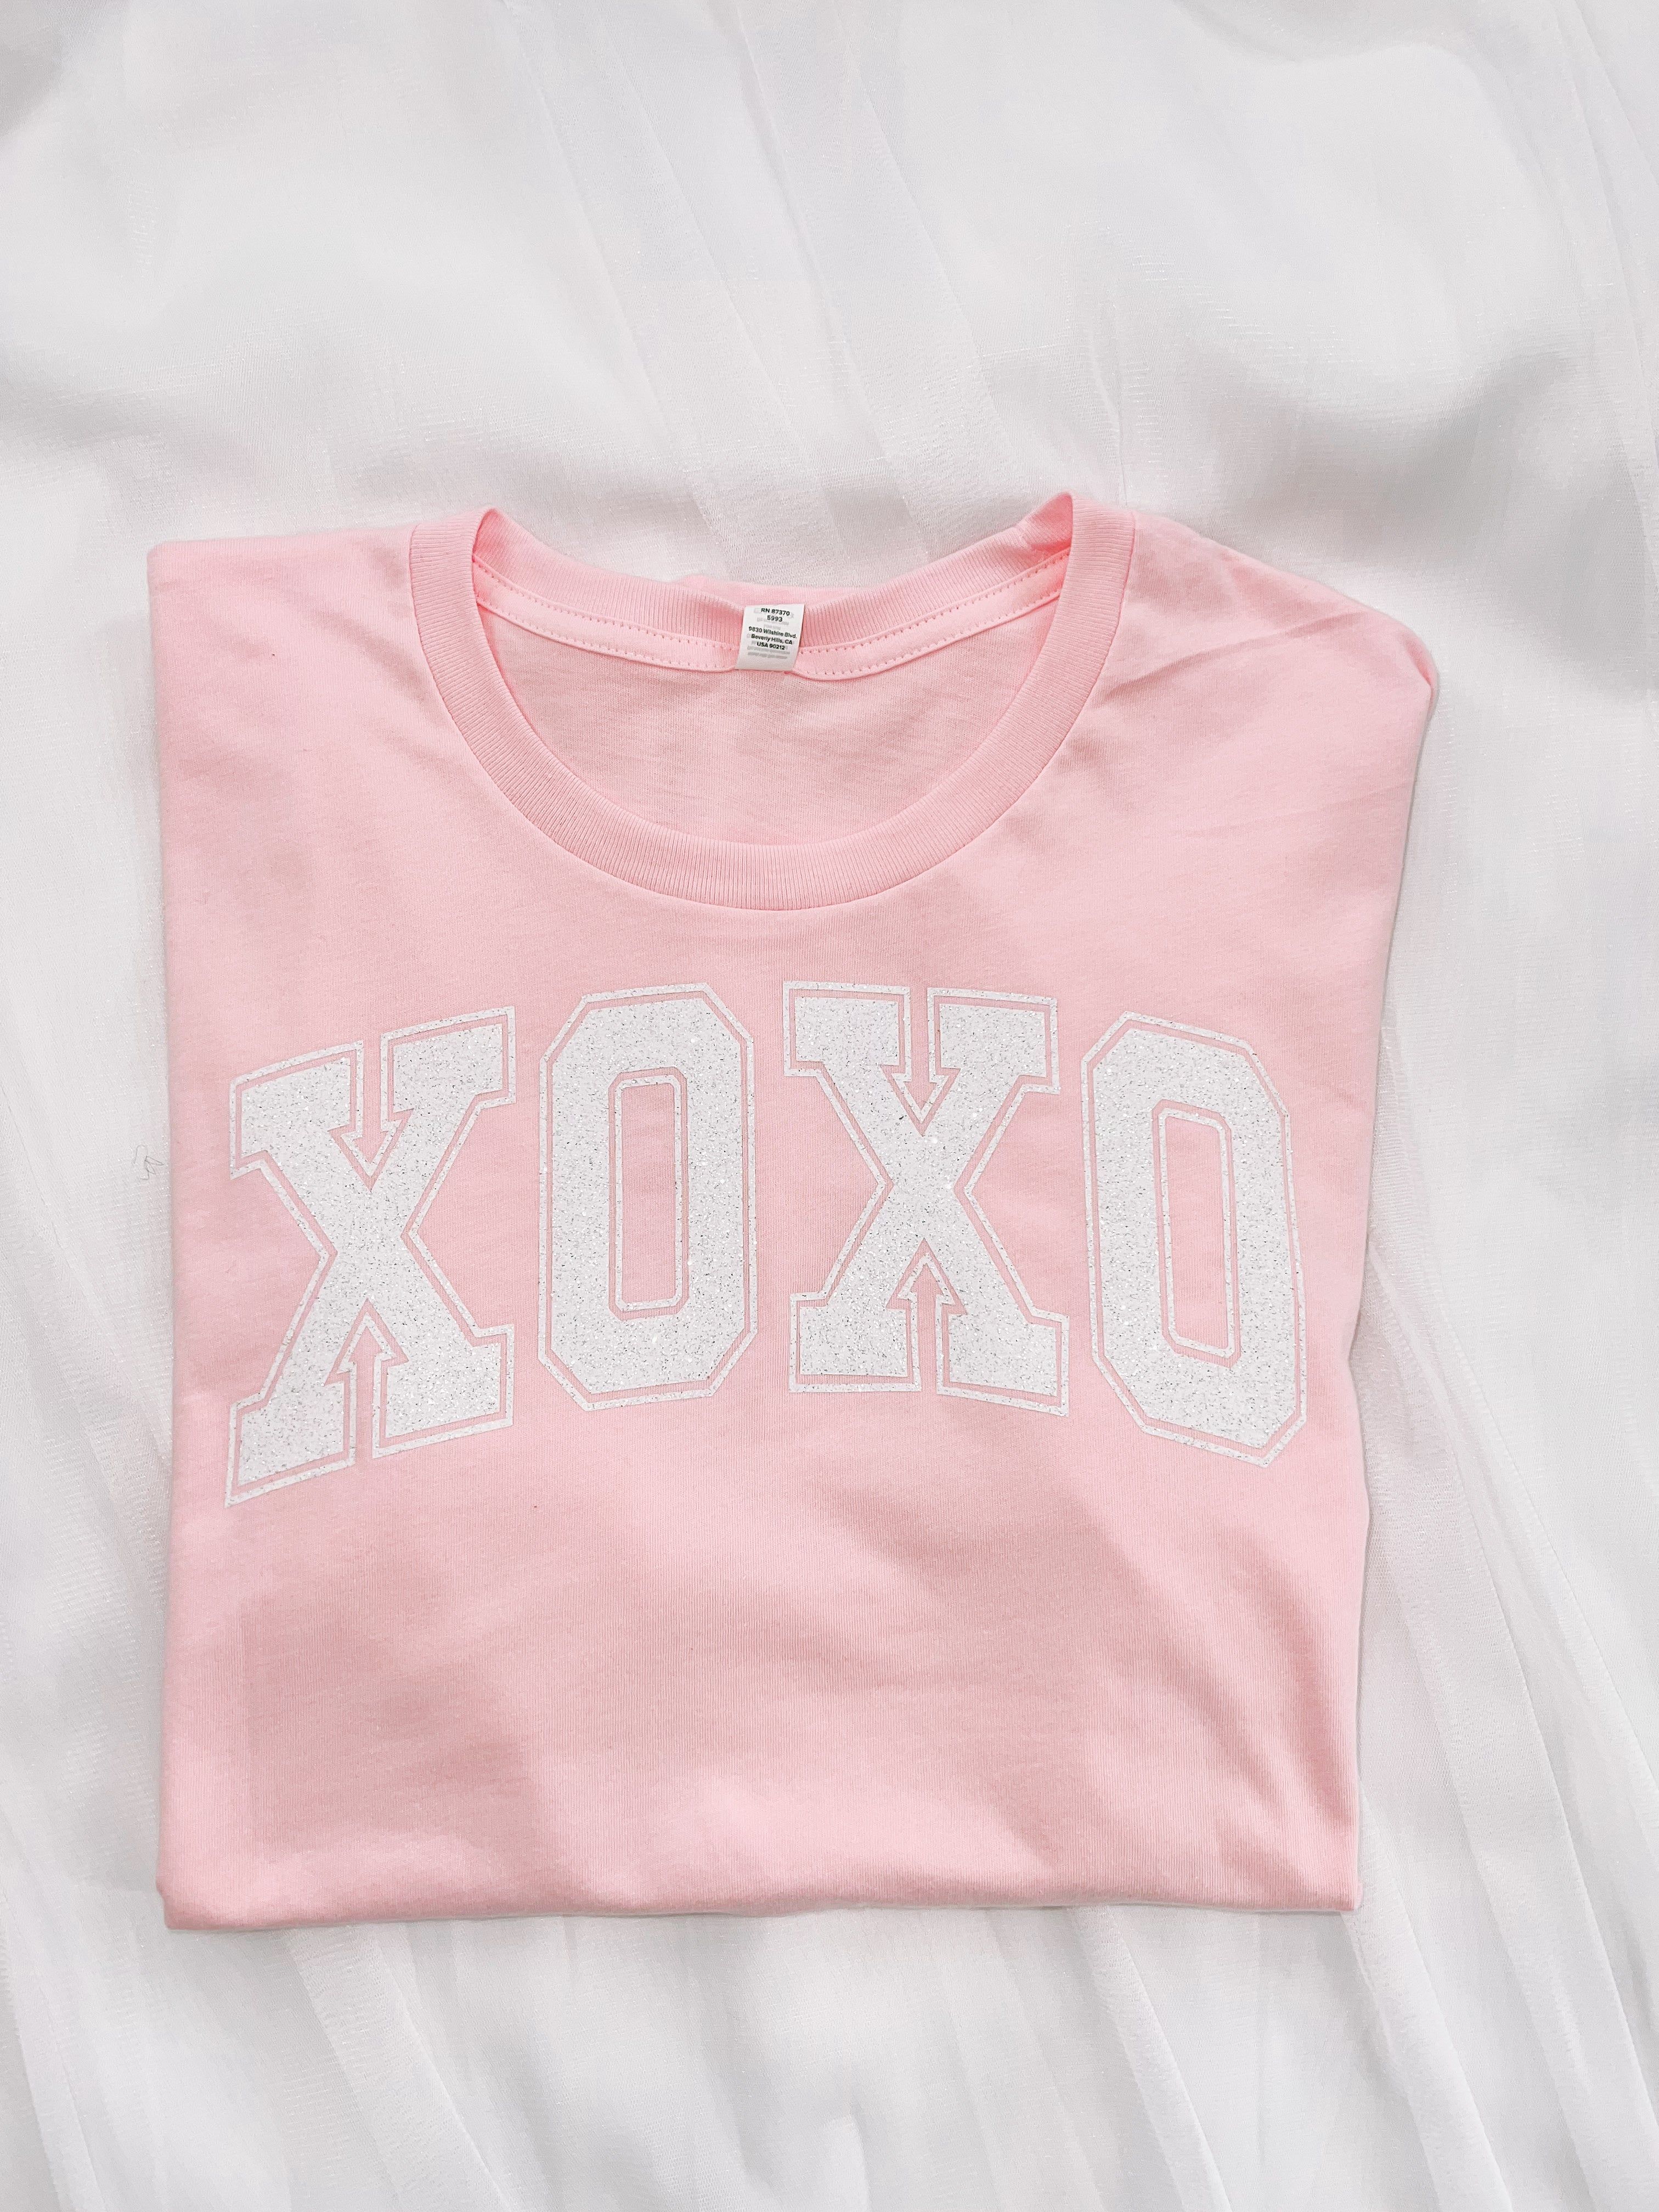 XOXO Glitter Tee. The XOXO Tee is a must-have for anyone looking for bot | Sweetest Dreams Style